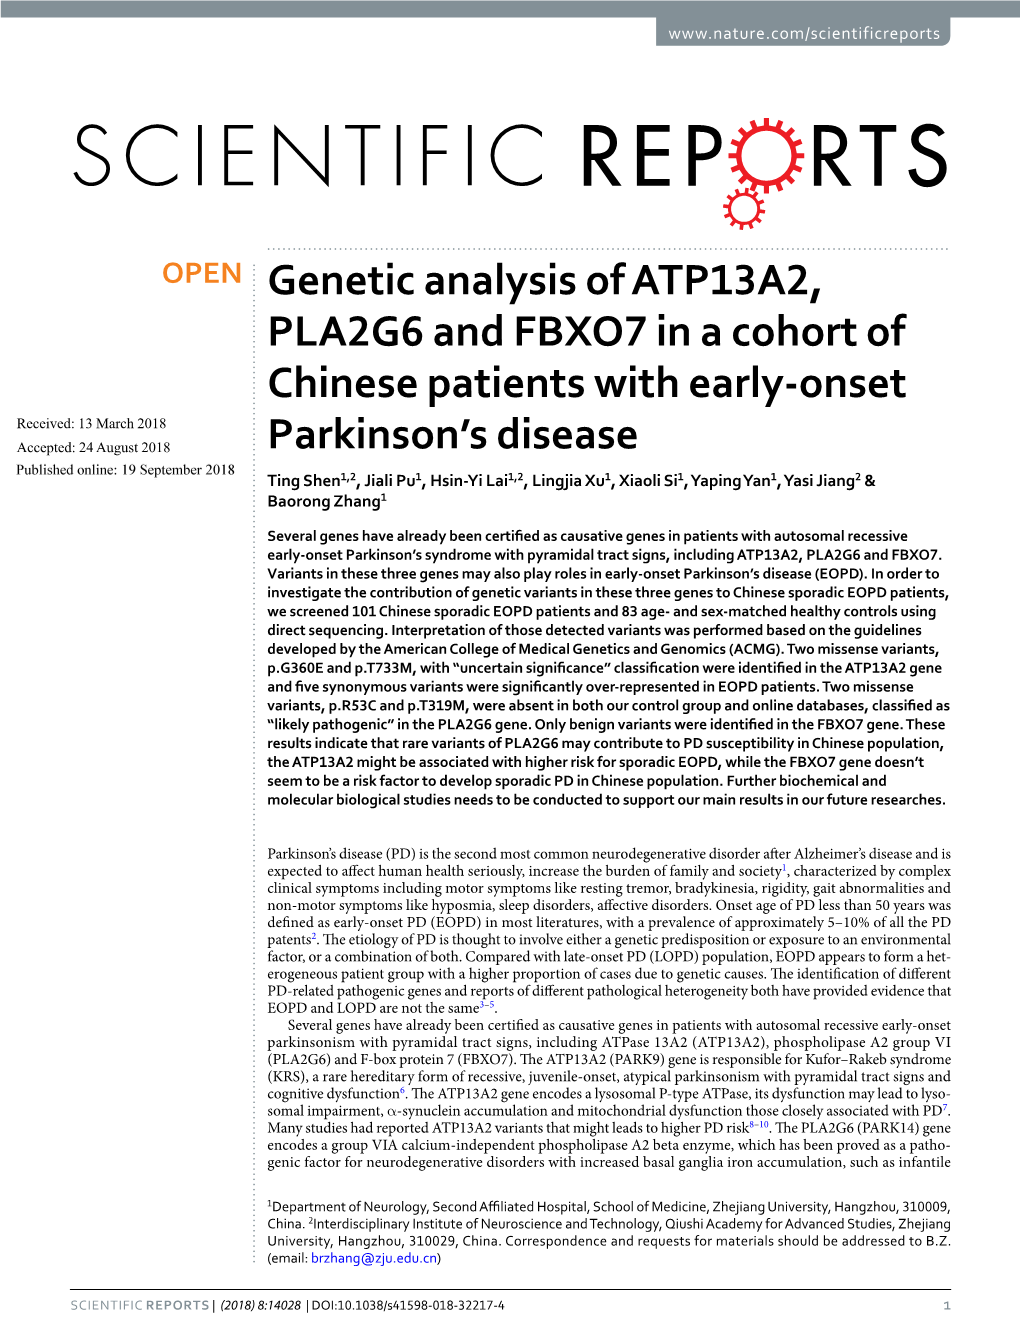 Genetic Analysis of ATP13A2, PLA2G6 and FBXO7 in a Cohort Of